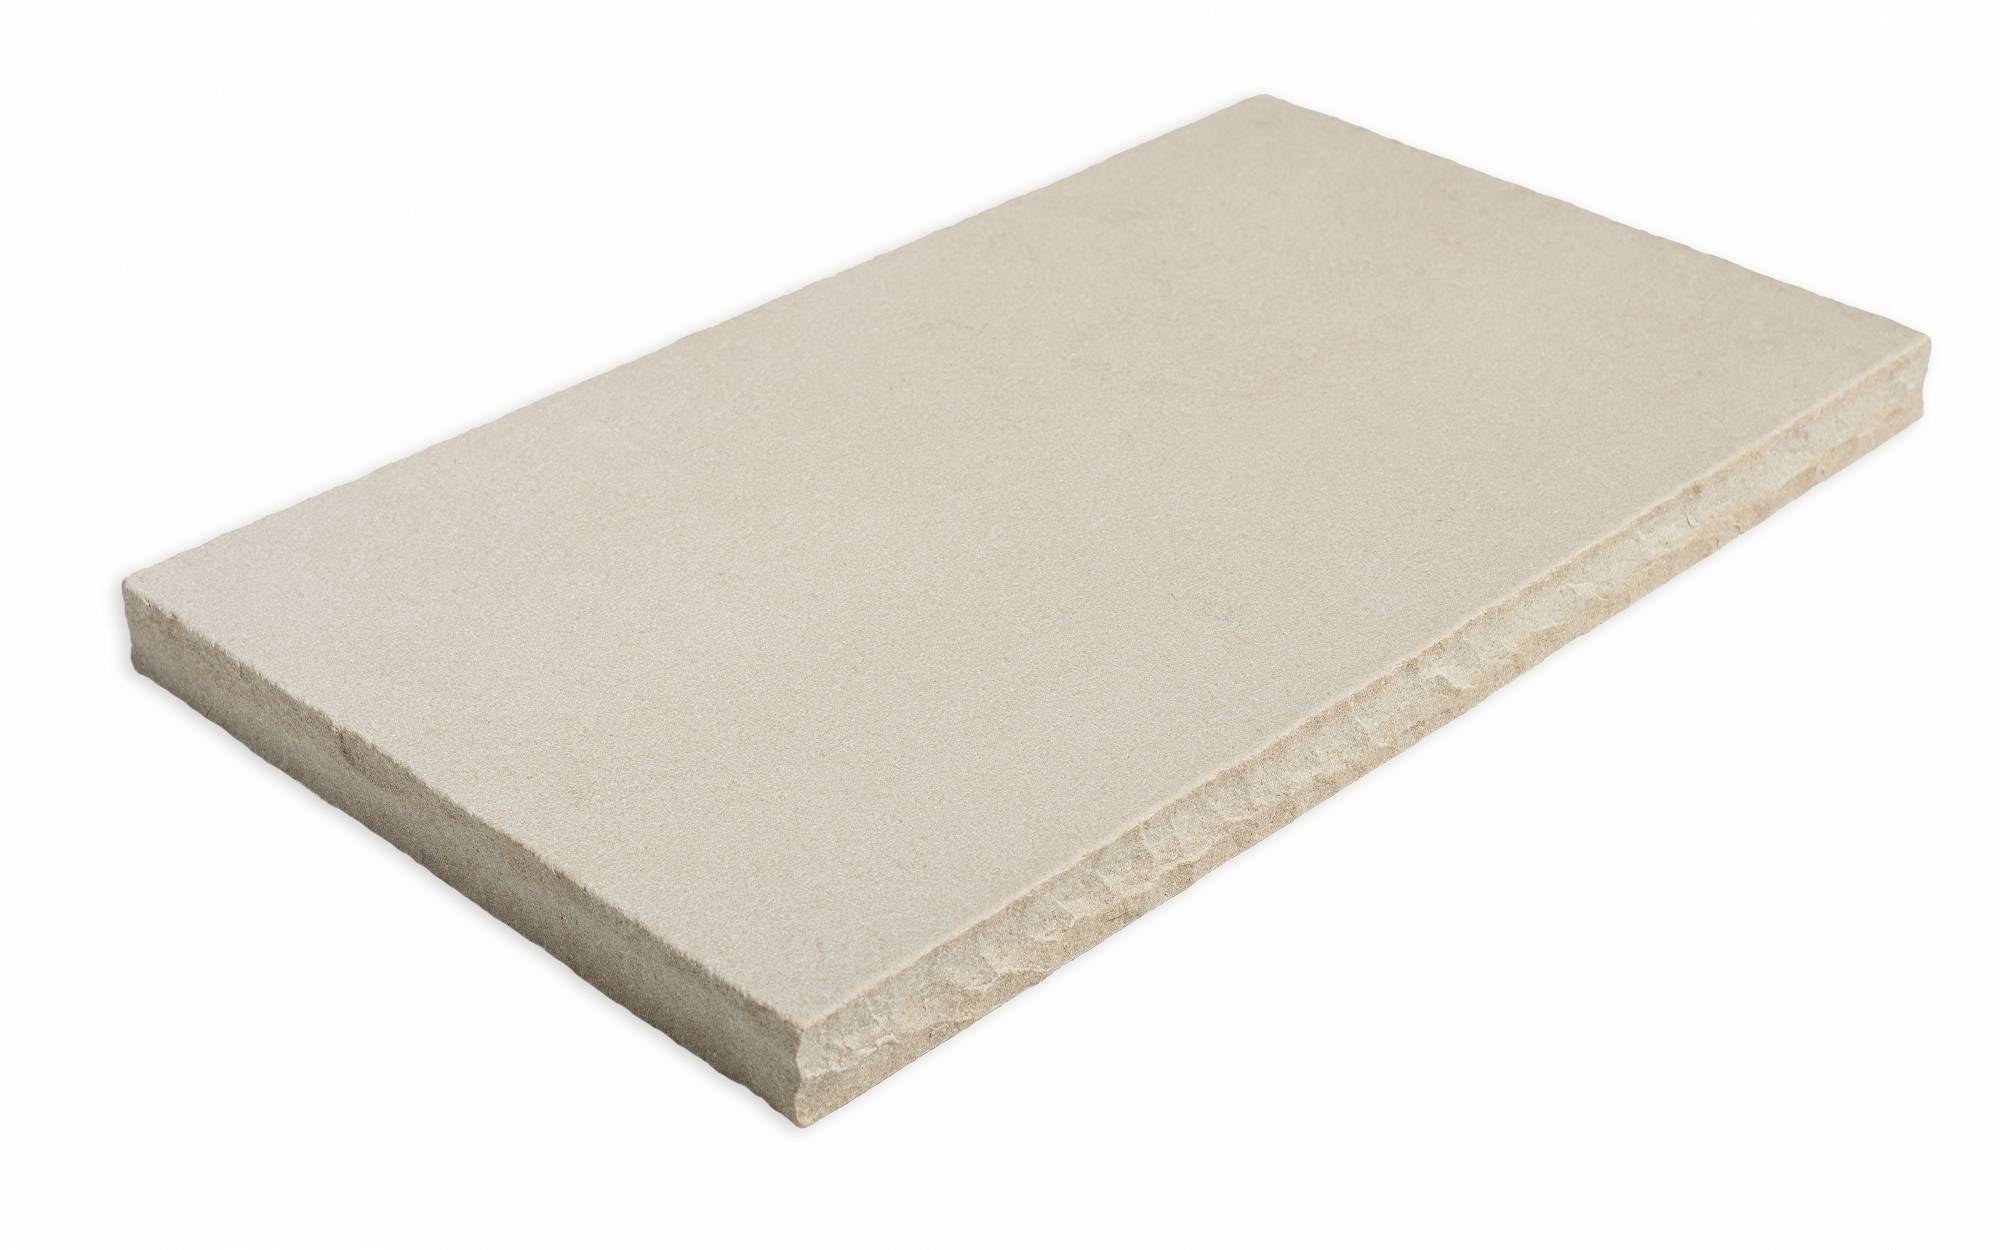 yorkshire old world flagstone signature paver cap molding 18 by 18 by 2 inch exterior applications manufactured by f and m supply distributed by surface group